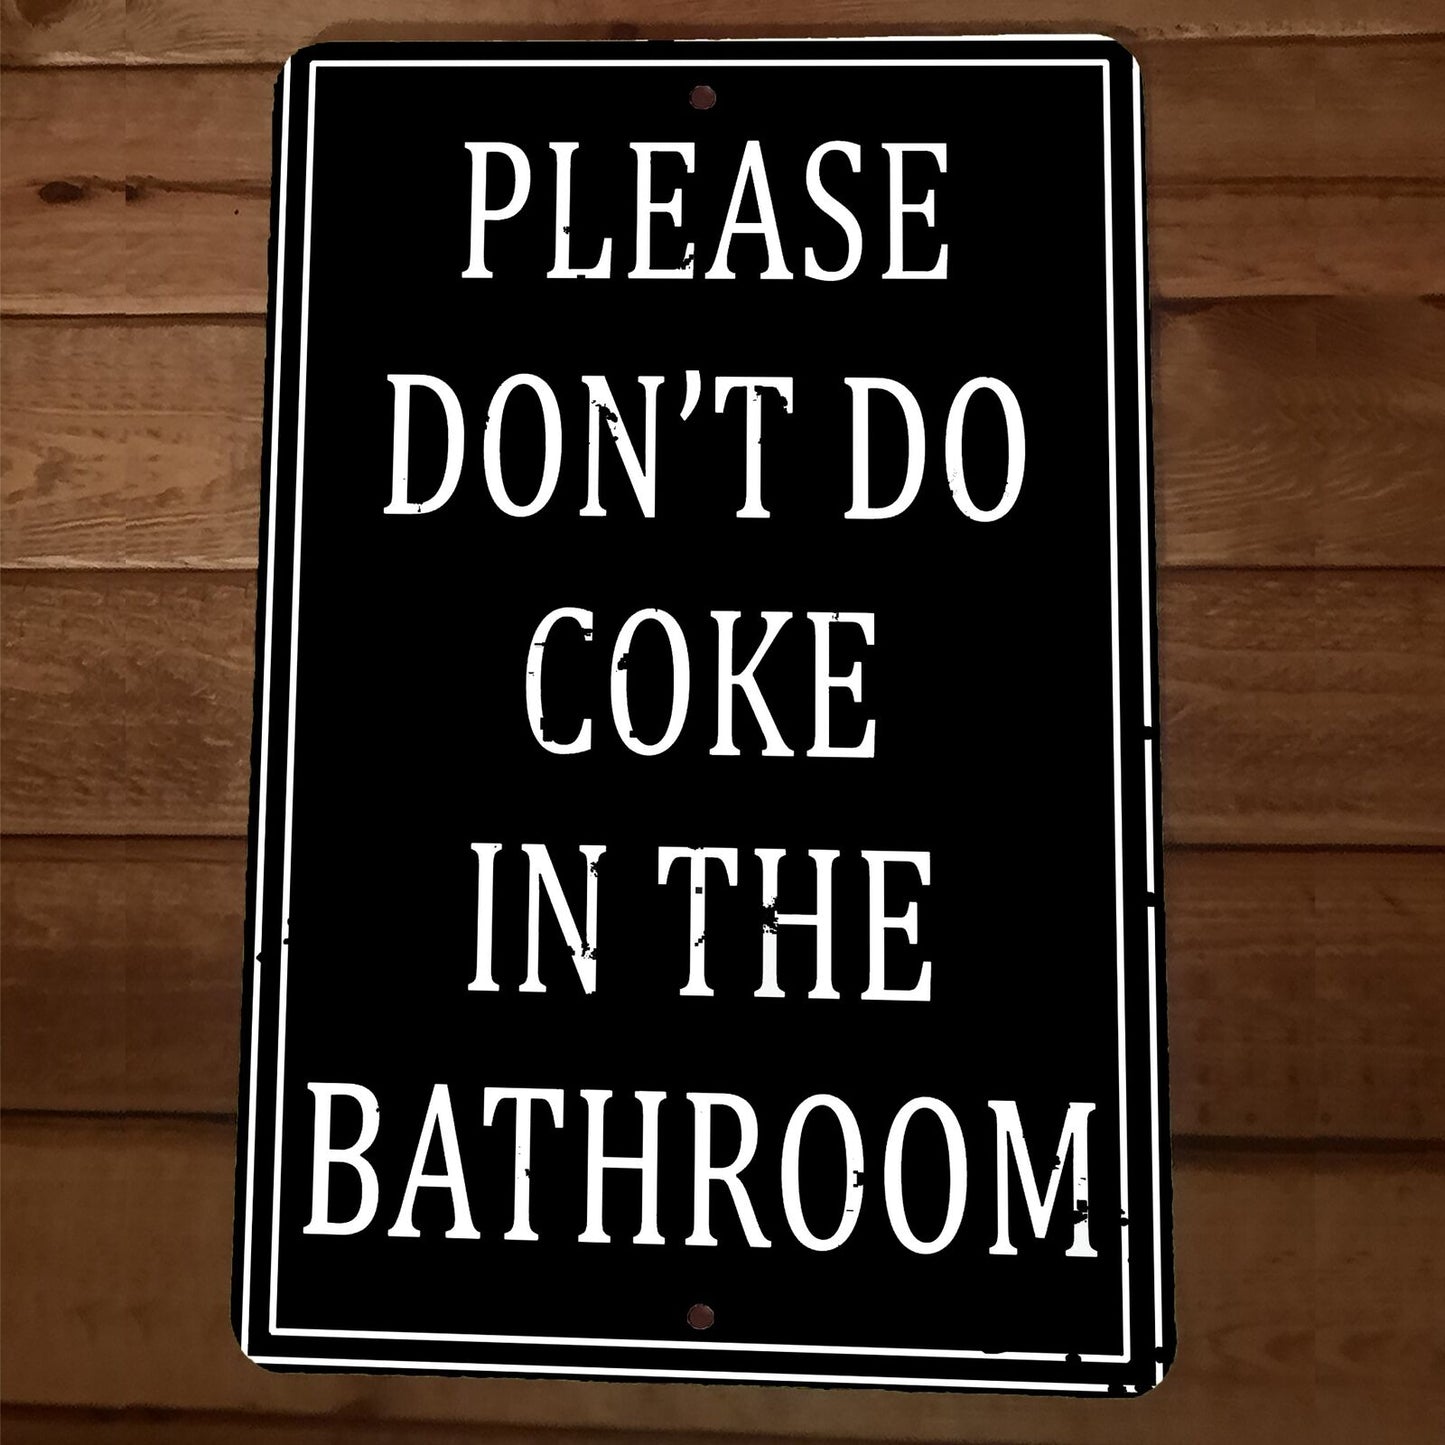 Please Don't Do Coke in the Bathroom 8x12 Metal Wall Sign Poster